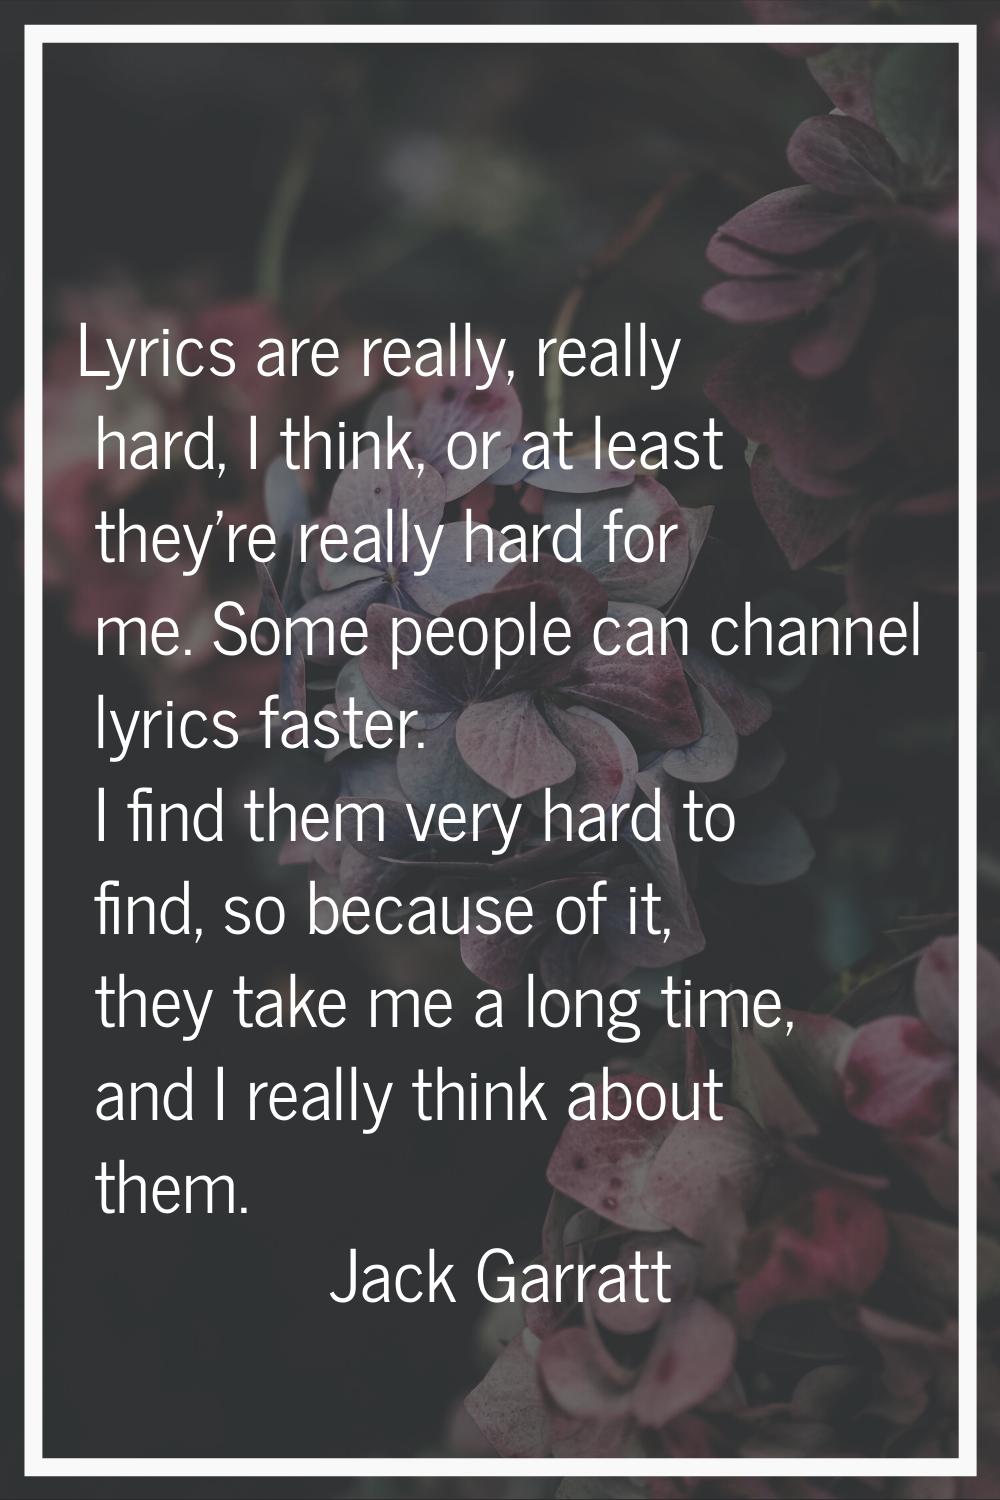 Lyrics are really, really hard, I think, or at least they're really hard for me. Some people can ch